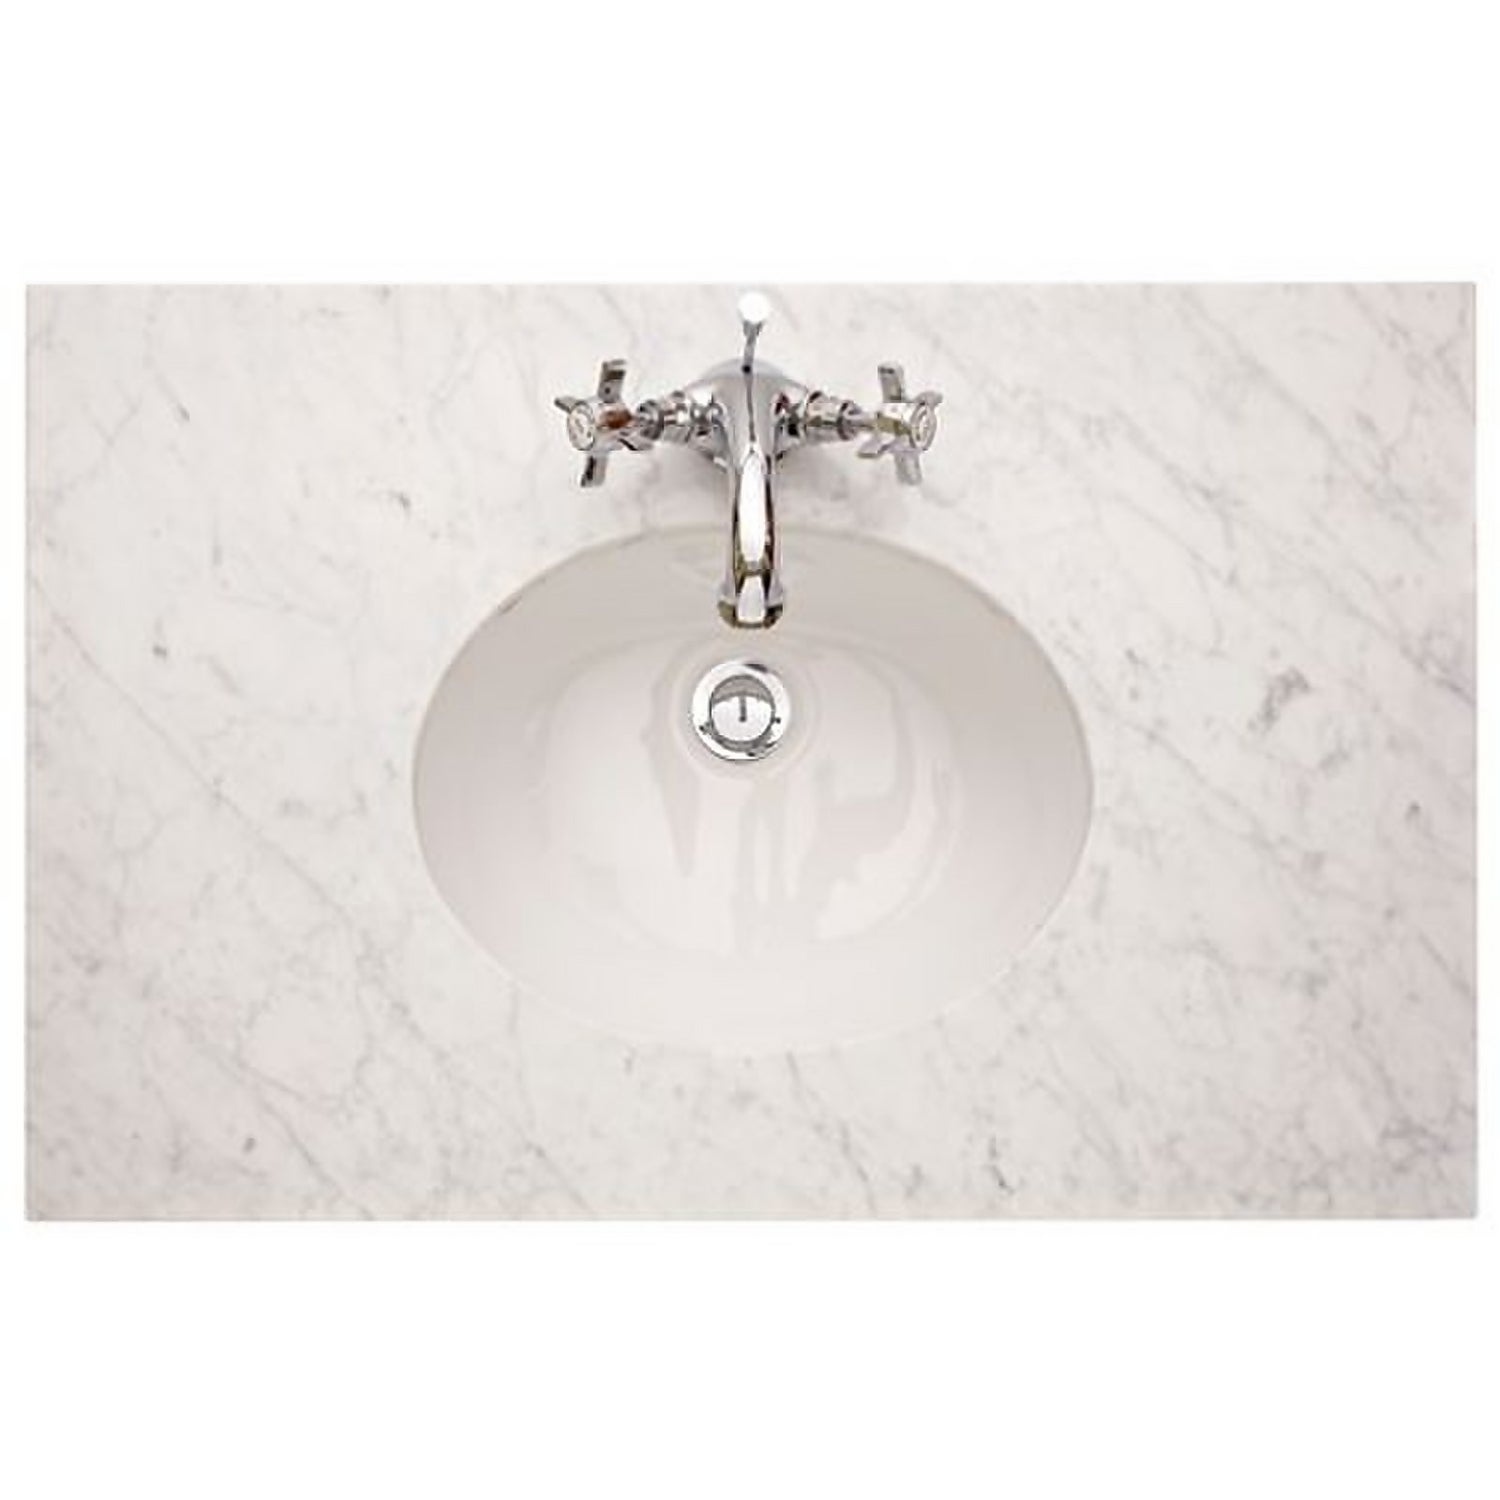 Savoy 790mm Old English Worktop with Basin - White Carrara Marble